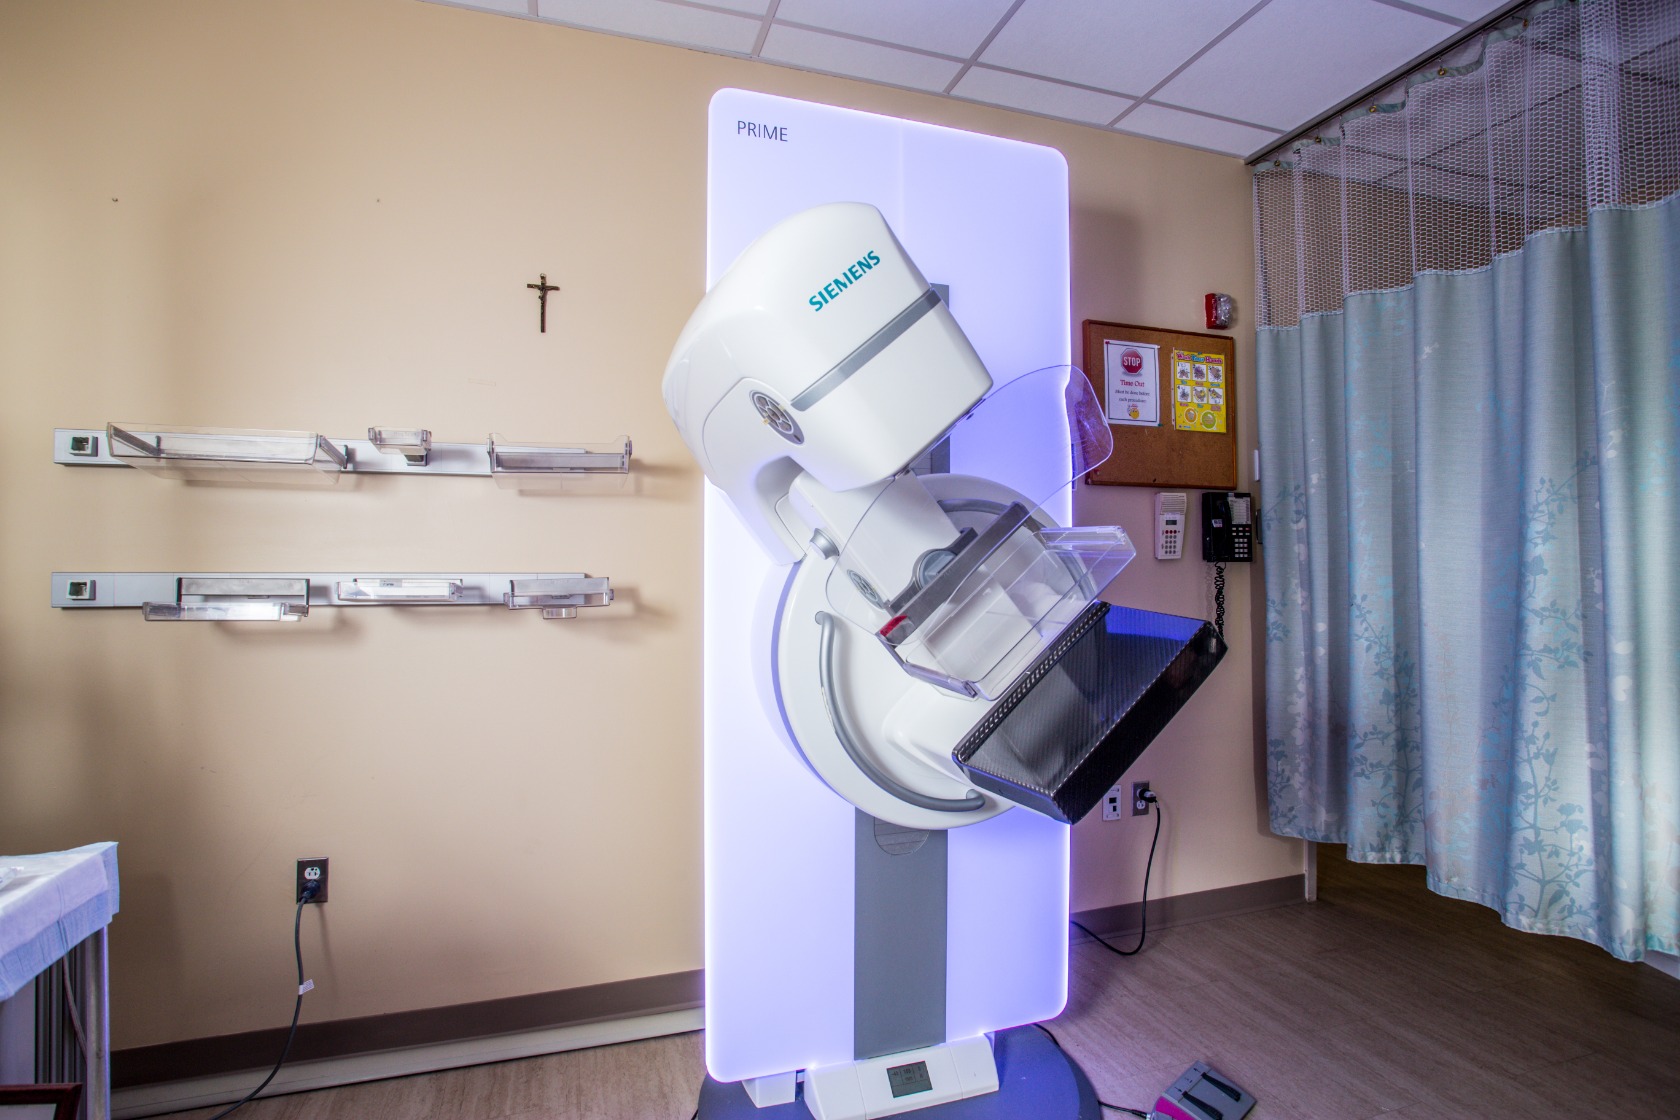 Medical Imaging Services - at St. Mary's General Hospital Photo